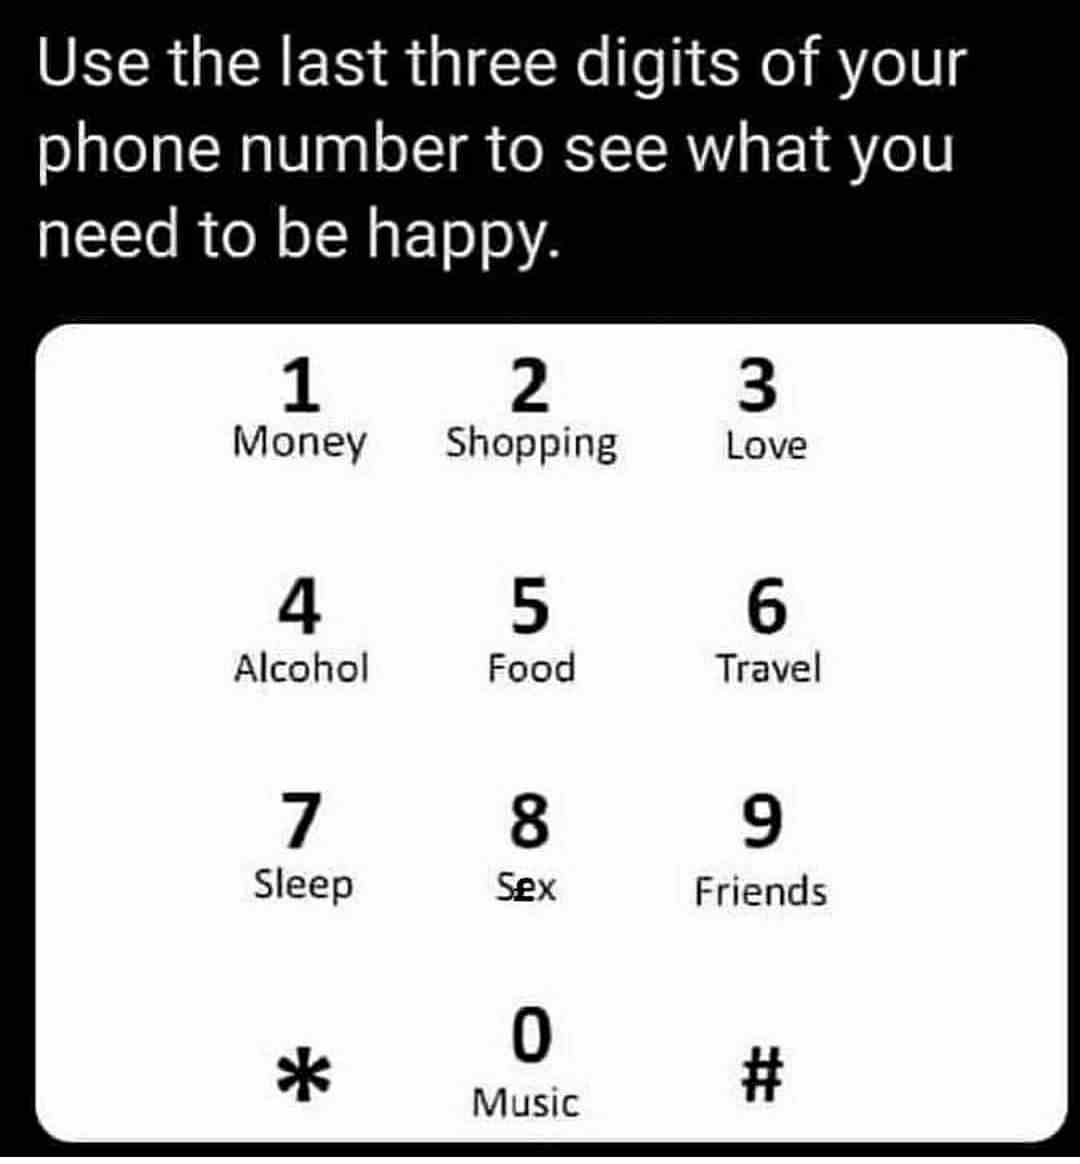 Use the last three digits of your phone number to see what you need to be happy